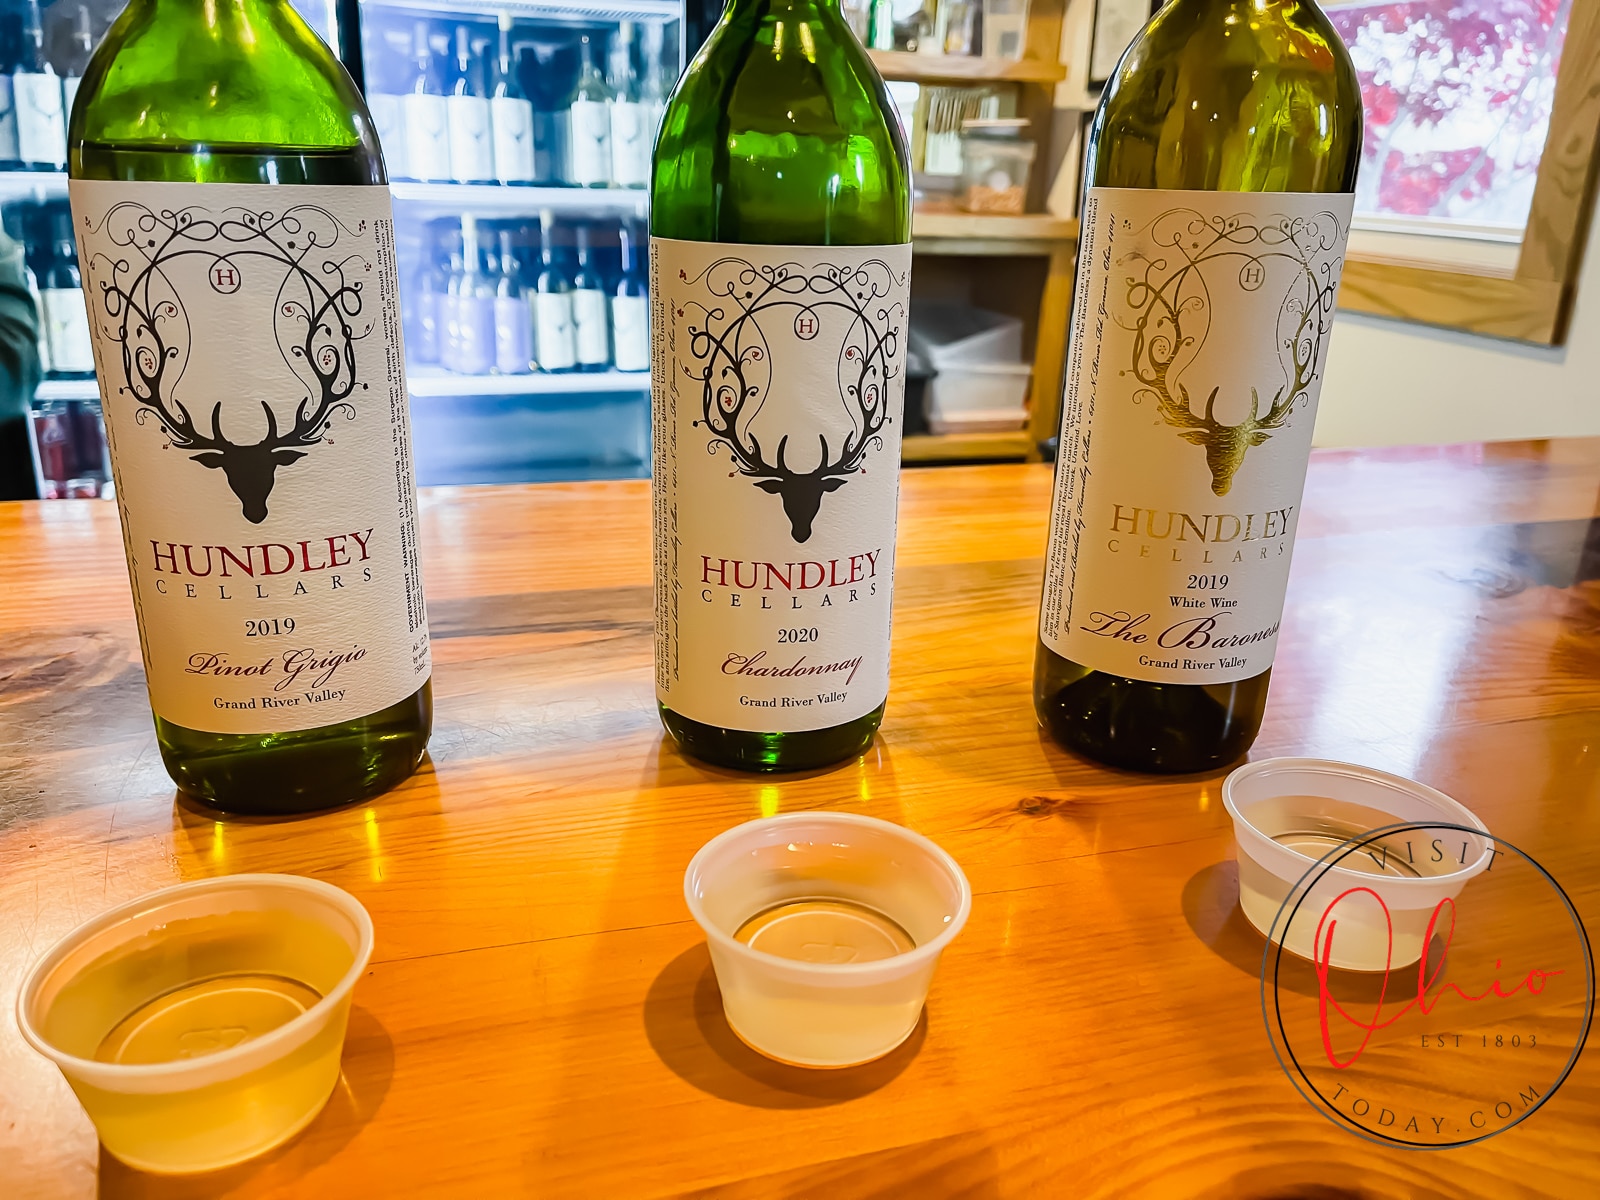 three green wine bottles with off white labels and deer antlers on it, with three clear plastic cups (small) filled with yellow liquid